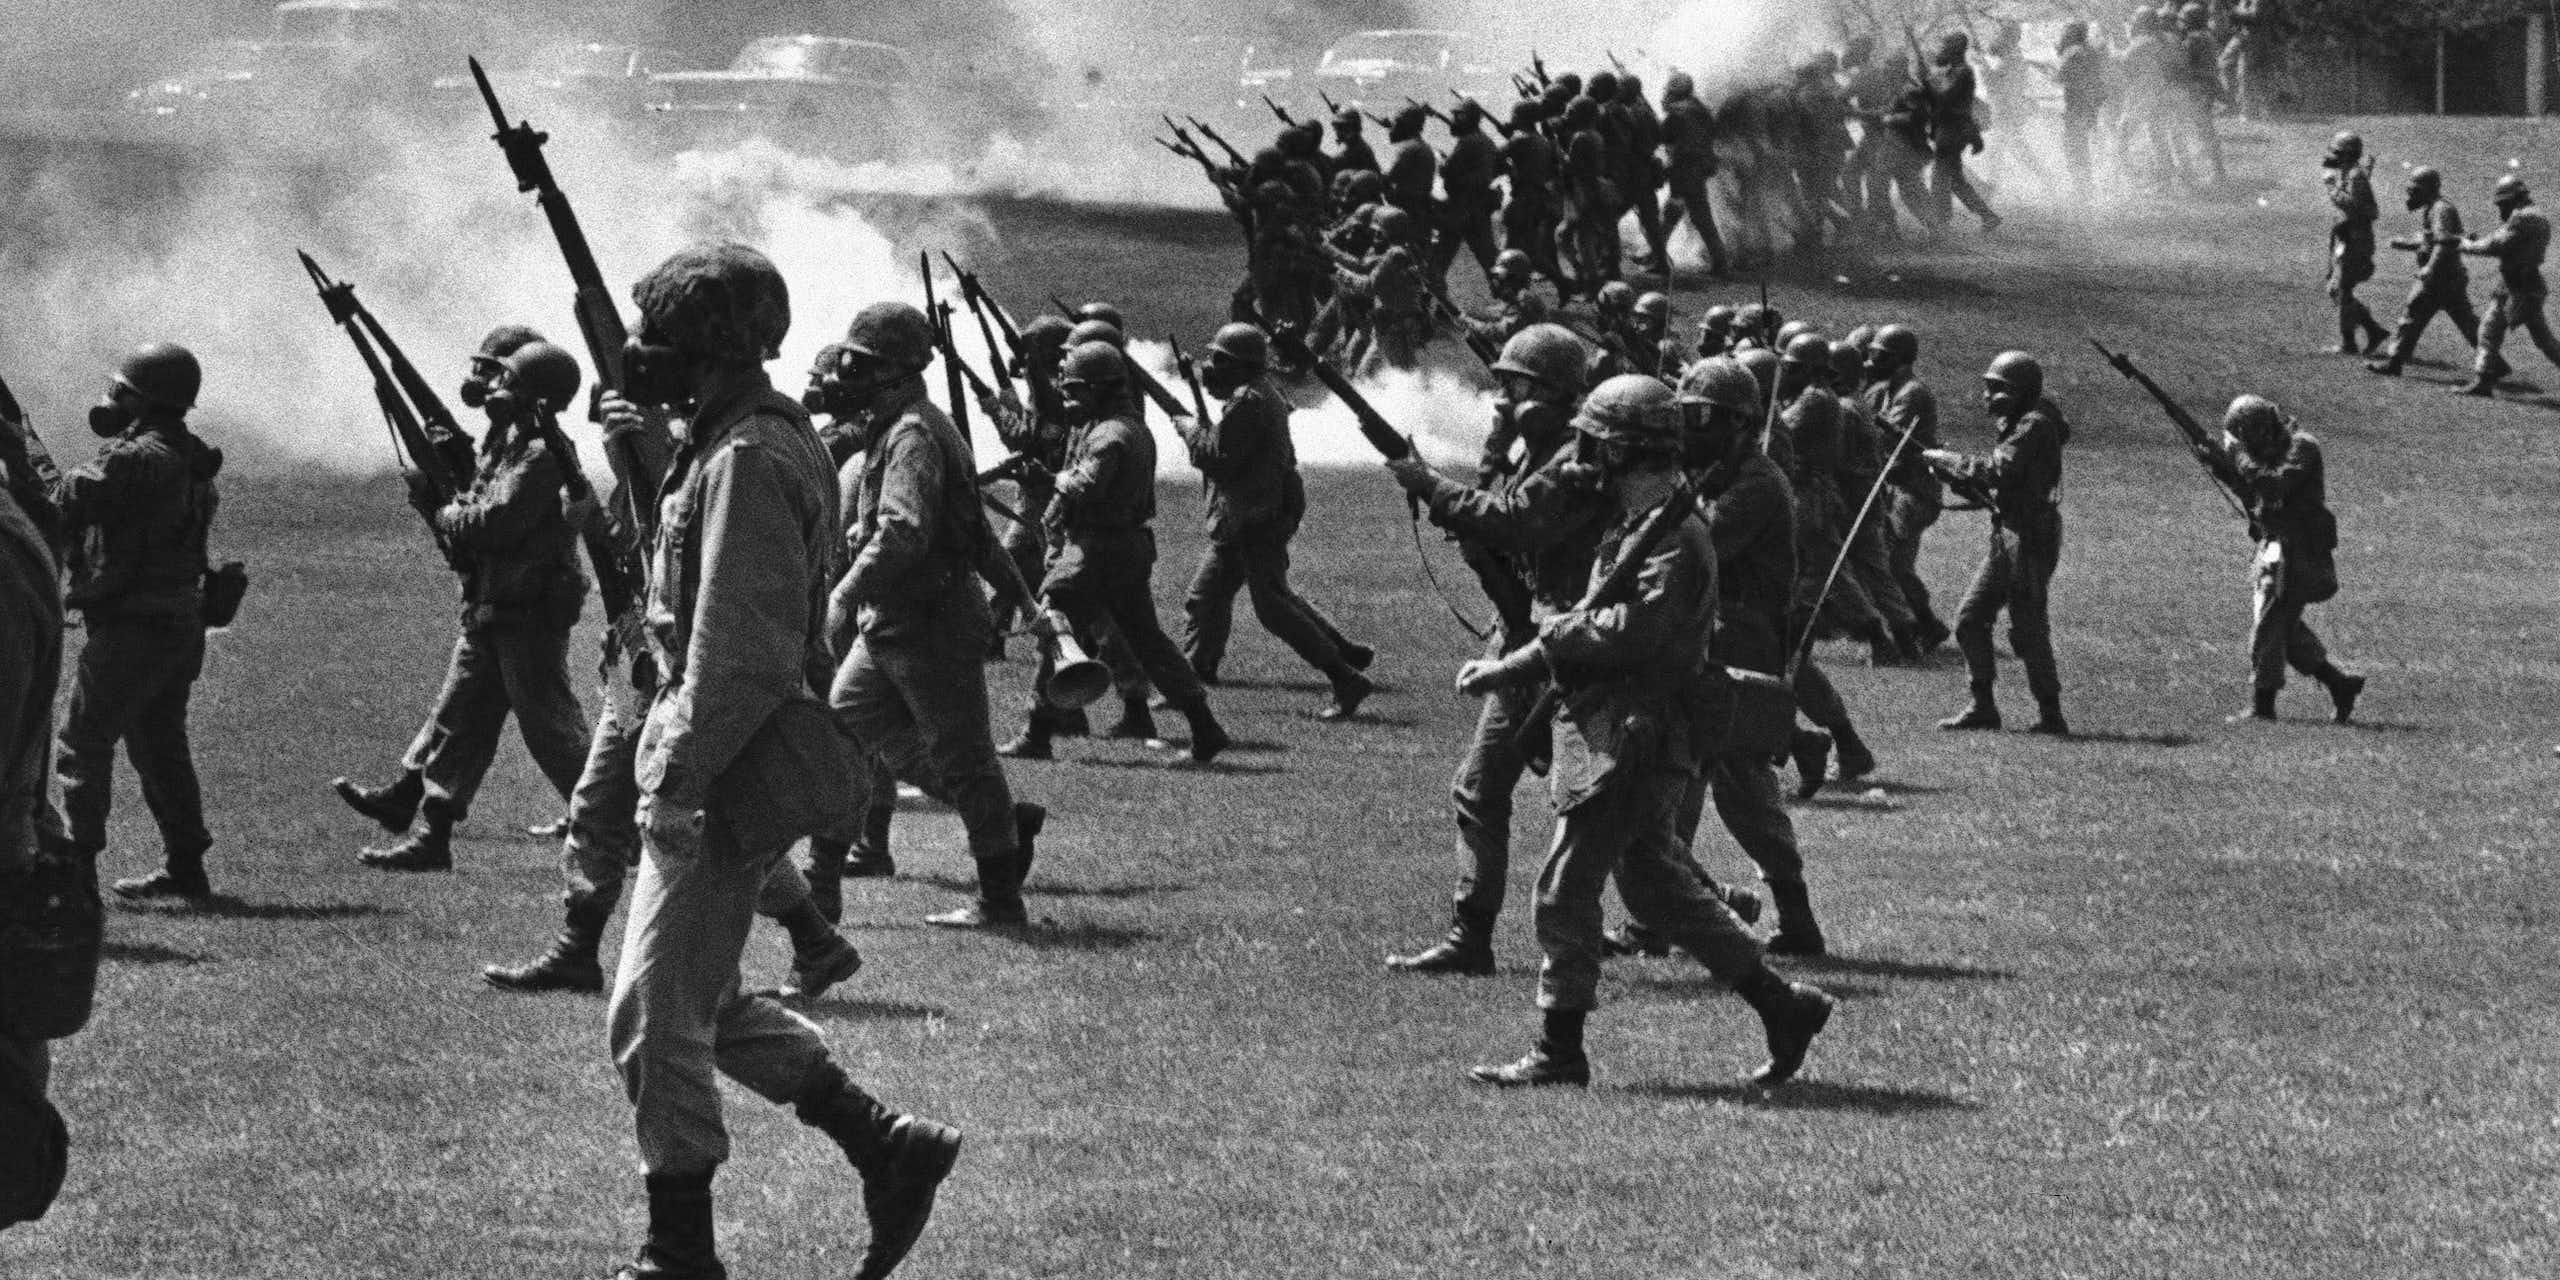 A black and white photo shows armed soldiers marching on a student protest.